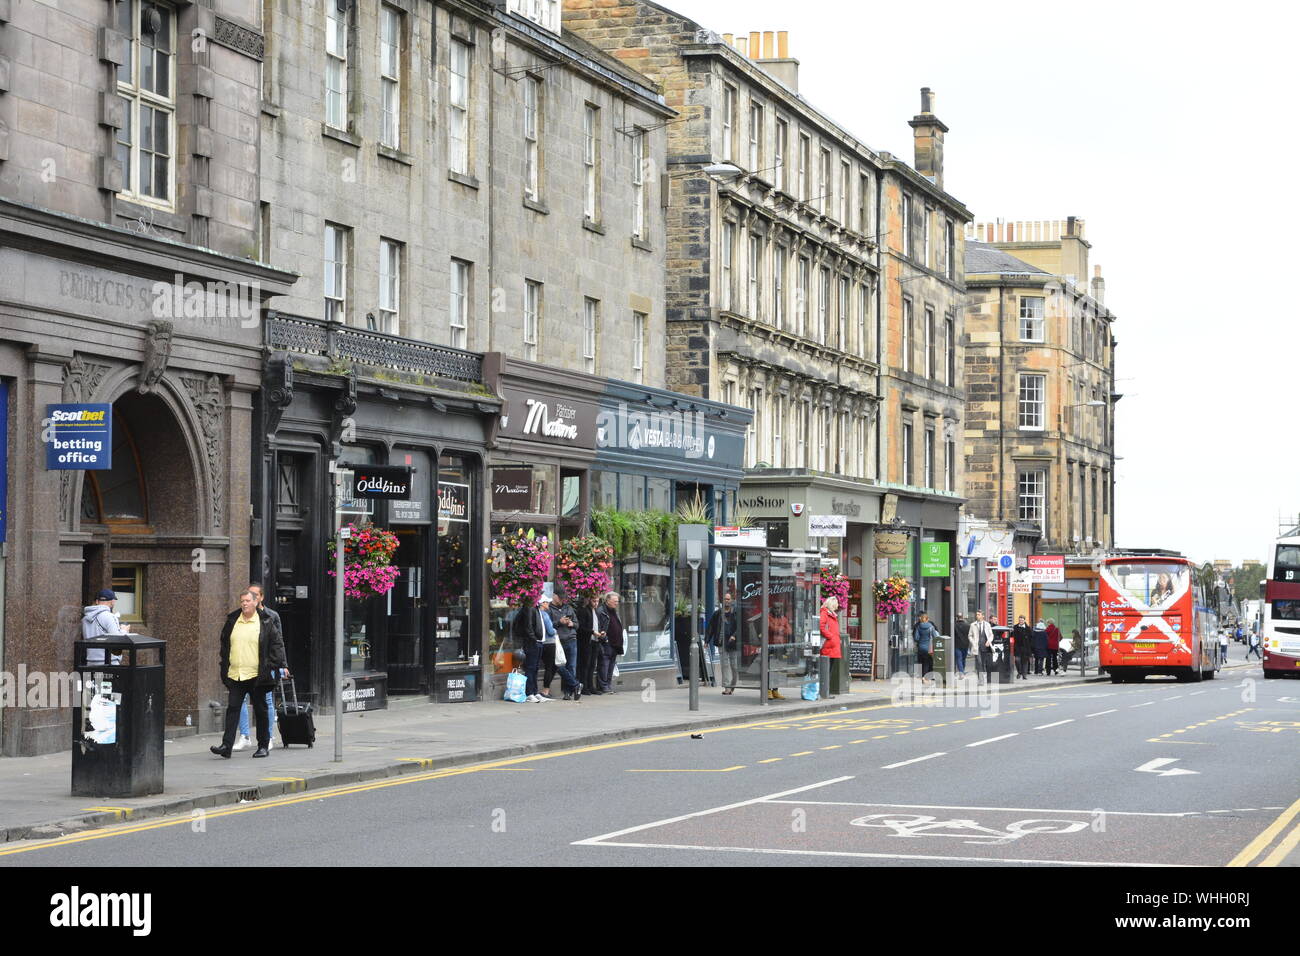 The City of Edinburgh is the capital city of Scotland large amounts of tourist  visit the city Stock Photo